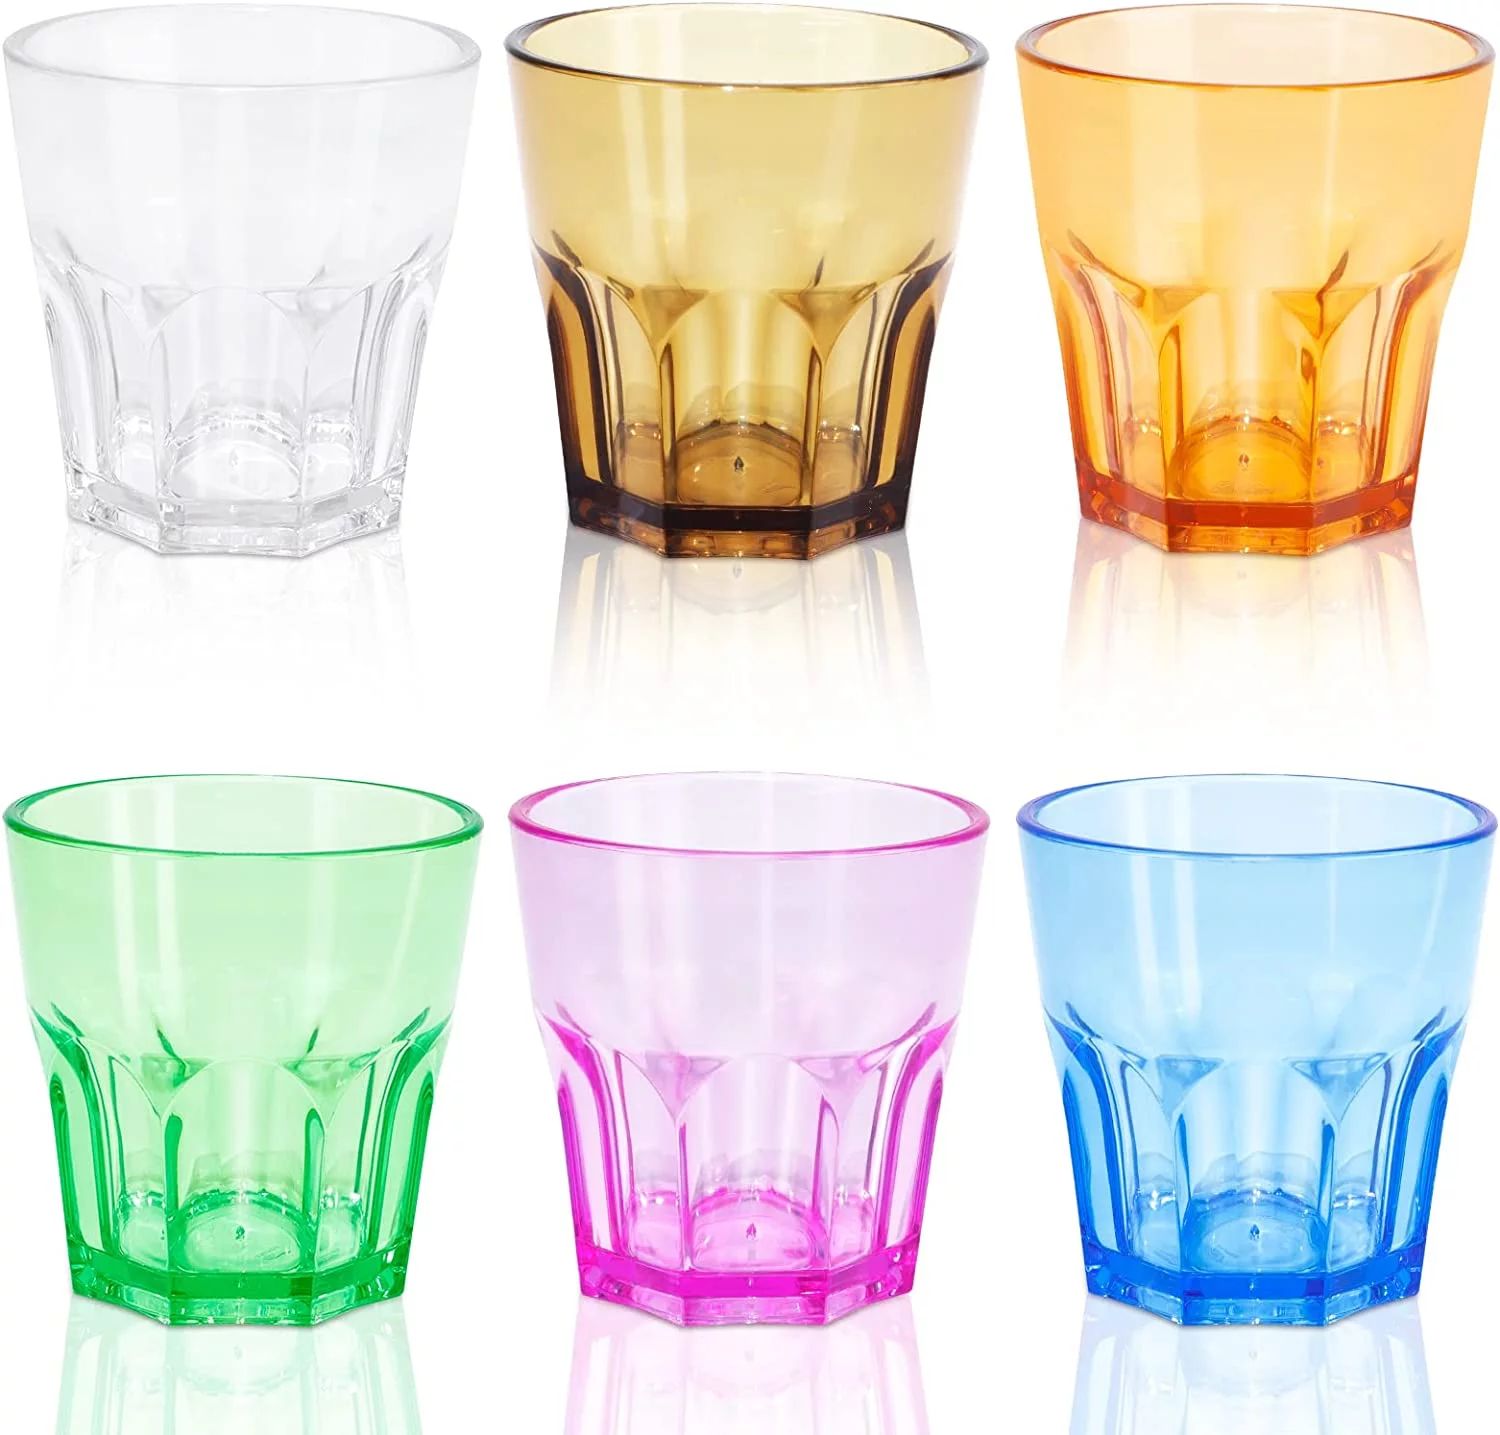 Colored Acrylic Glasses Drinkware, Unbreakable Glasses Drinking Set of 6, Plastic Cups Reusable, ... | Walmart (US)